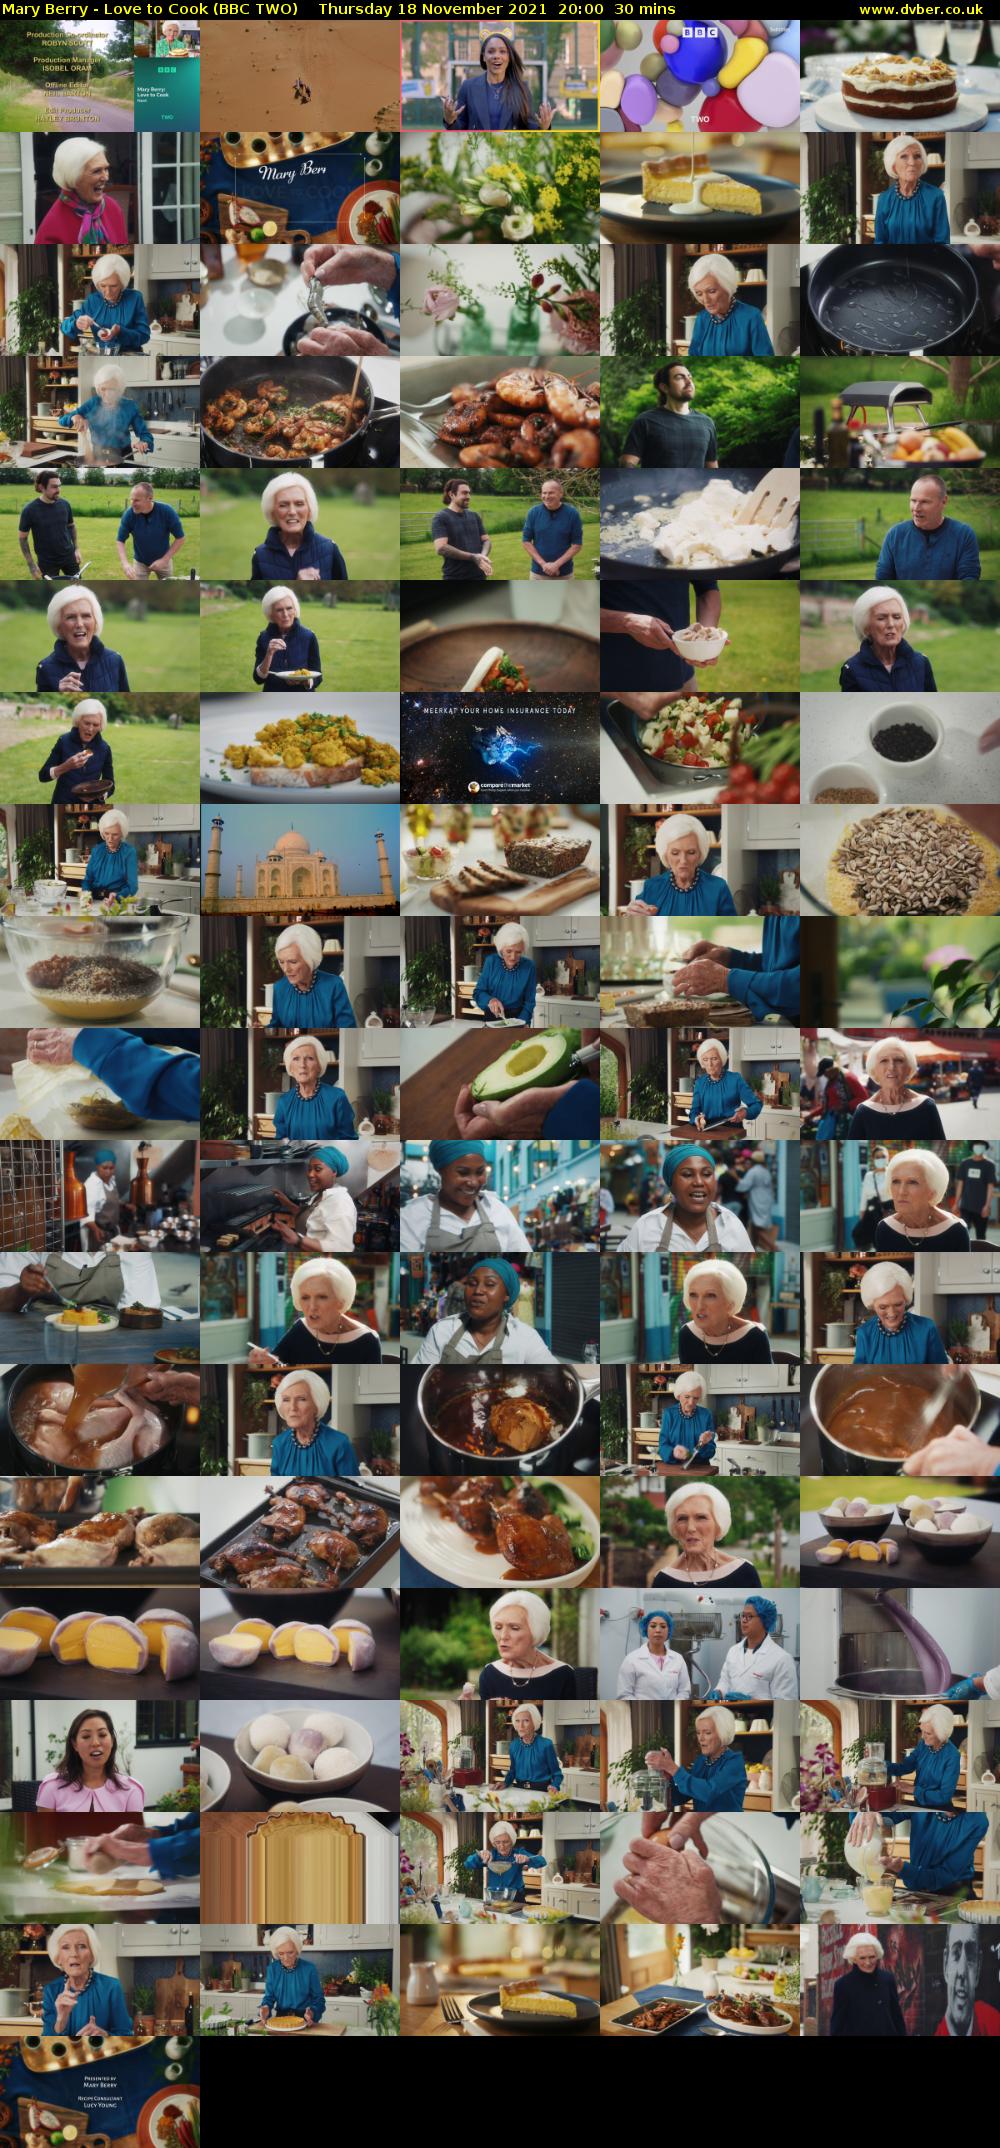 Mary Berry - Love to Cook (BBC TWO) Thursday 18 November 2021 20:00 - 20:30